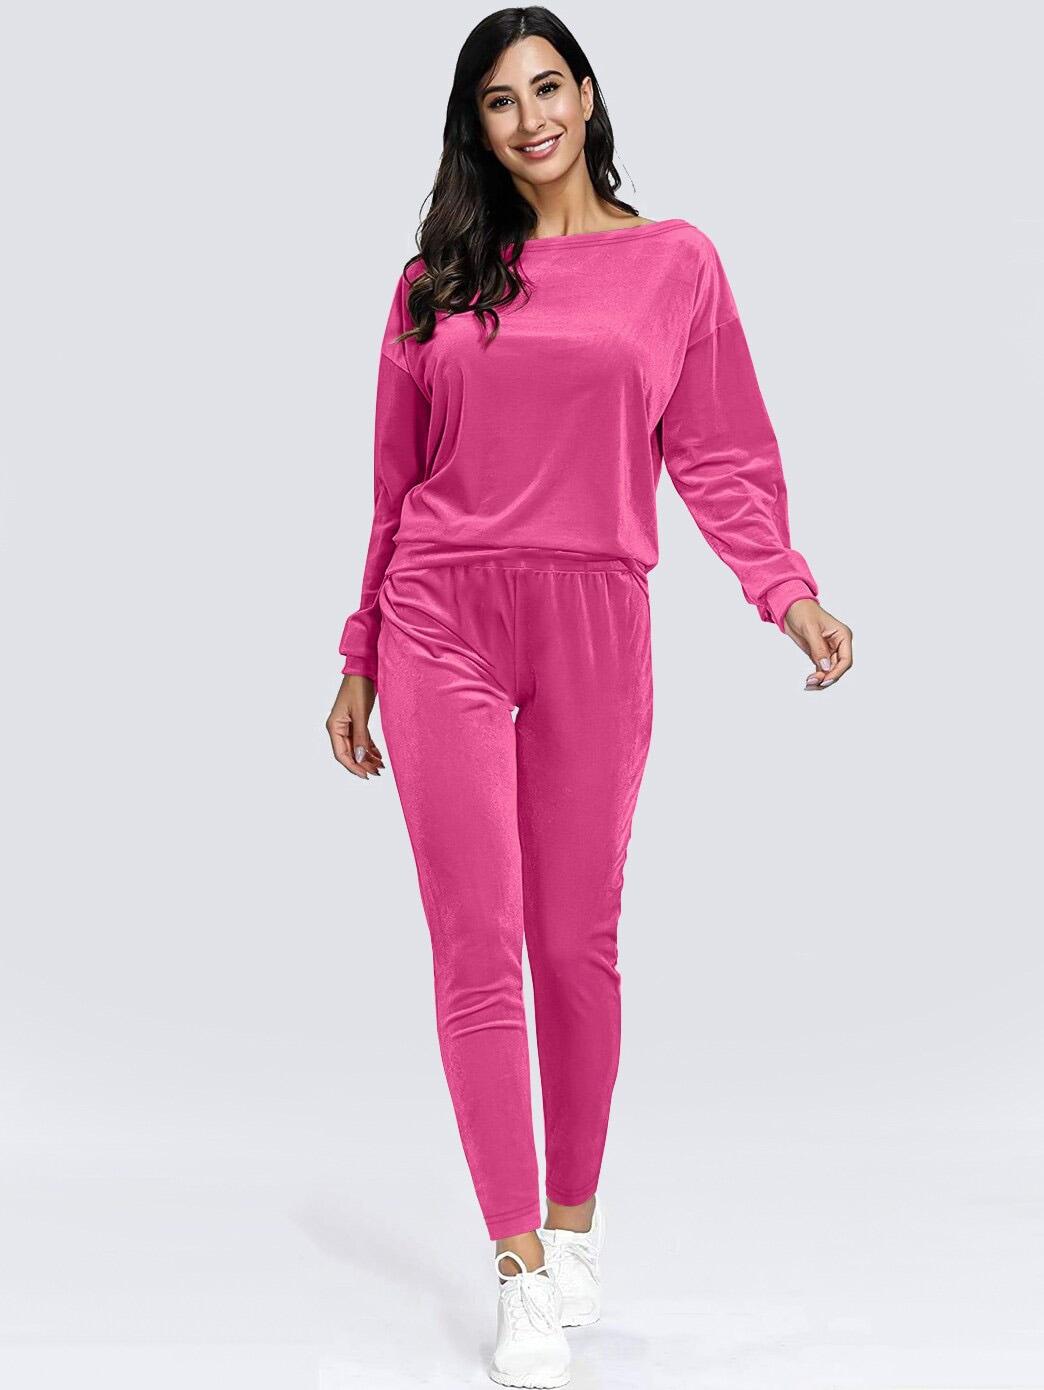 stylecast fuchsia round neck  long sleeve top with trousers co-ords